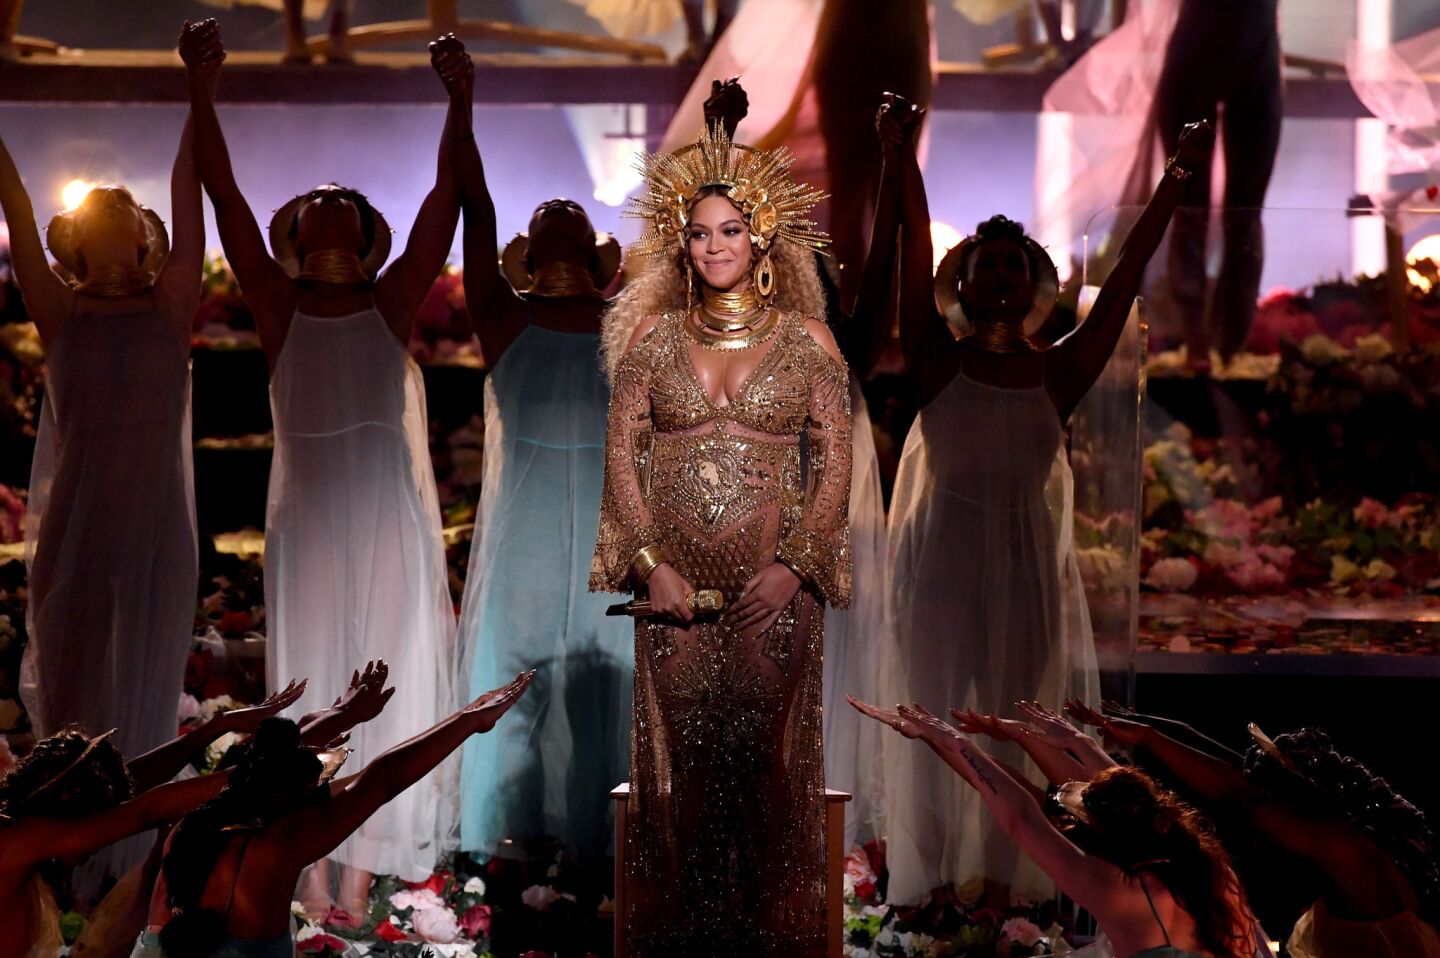 Beyonce basks in the glow of her Grammys performance.